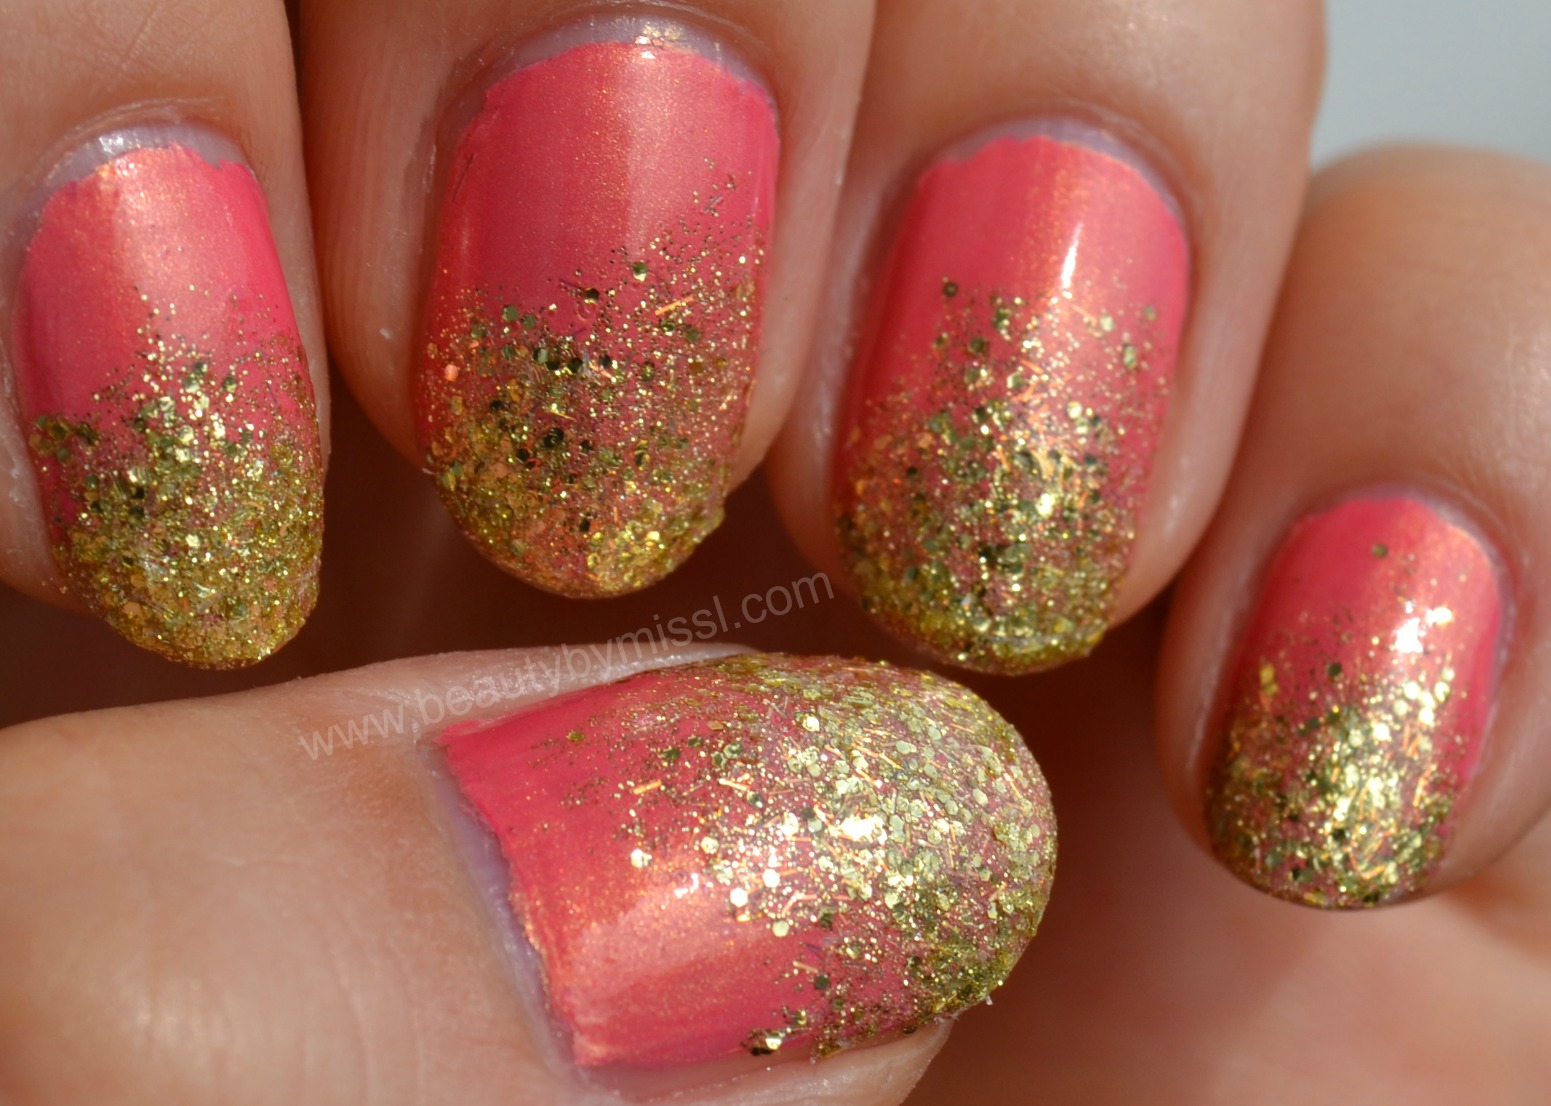 notd nails of the day